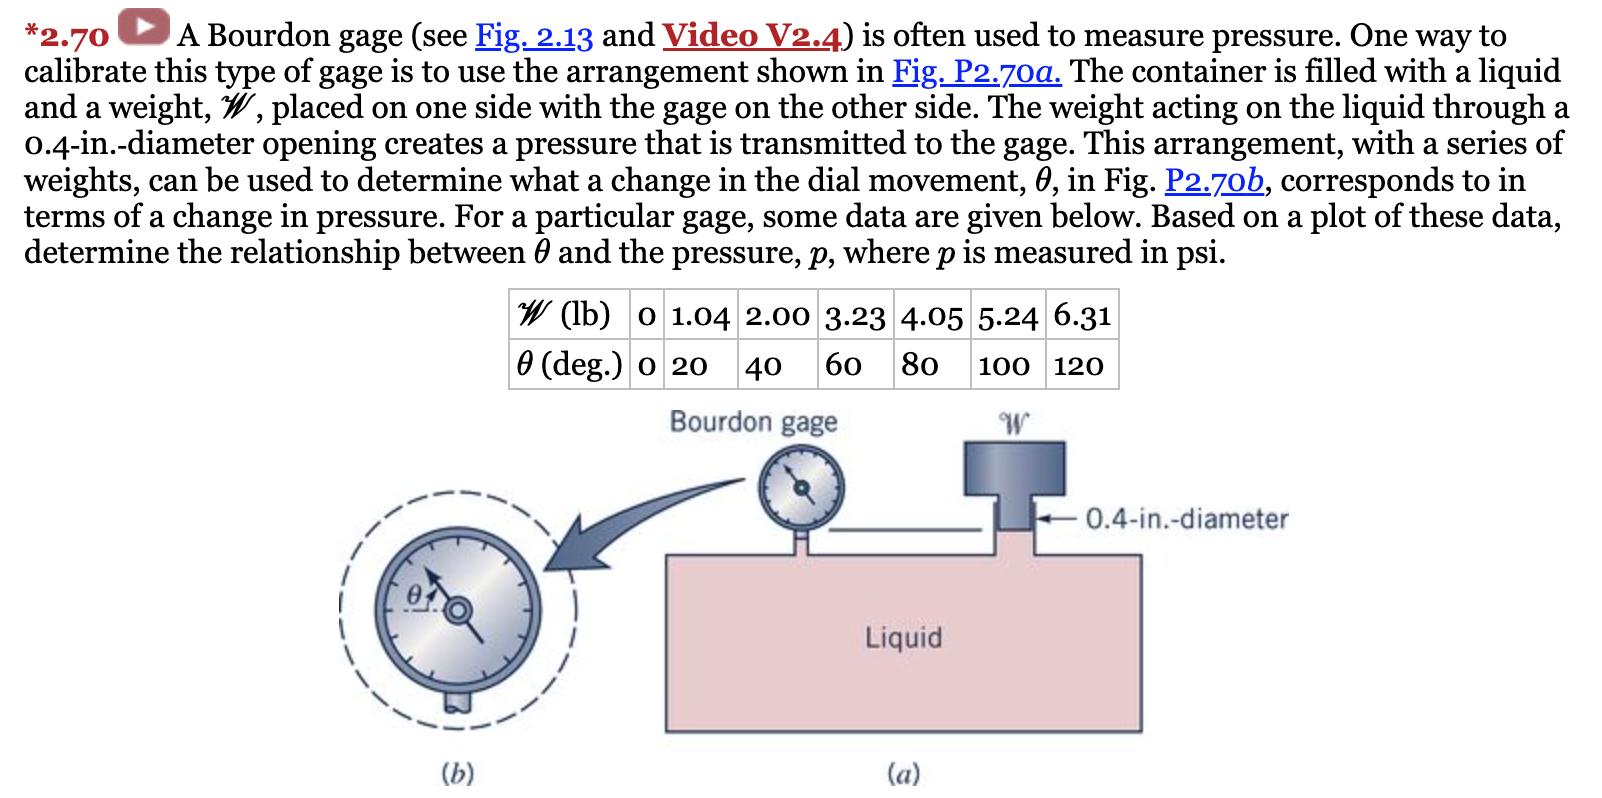 *2.70 A Bourdon gage (see Fig. ( 2.13 ) and Video V2.4) is often used to measure pressure. One way to calibrate this type o